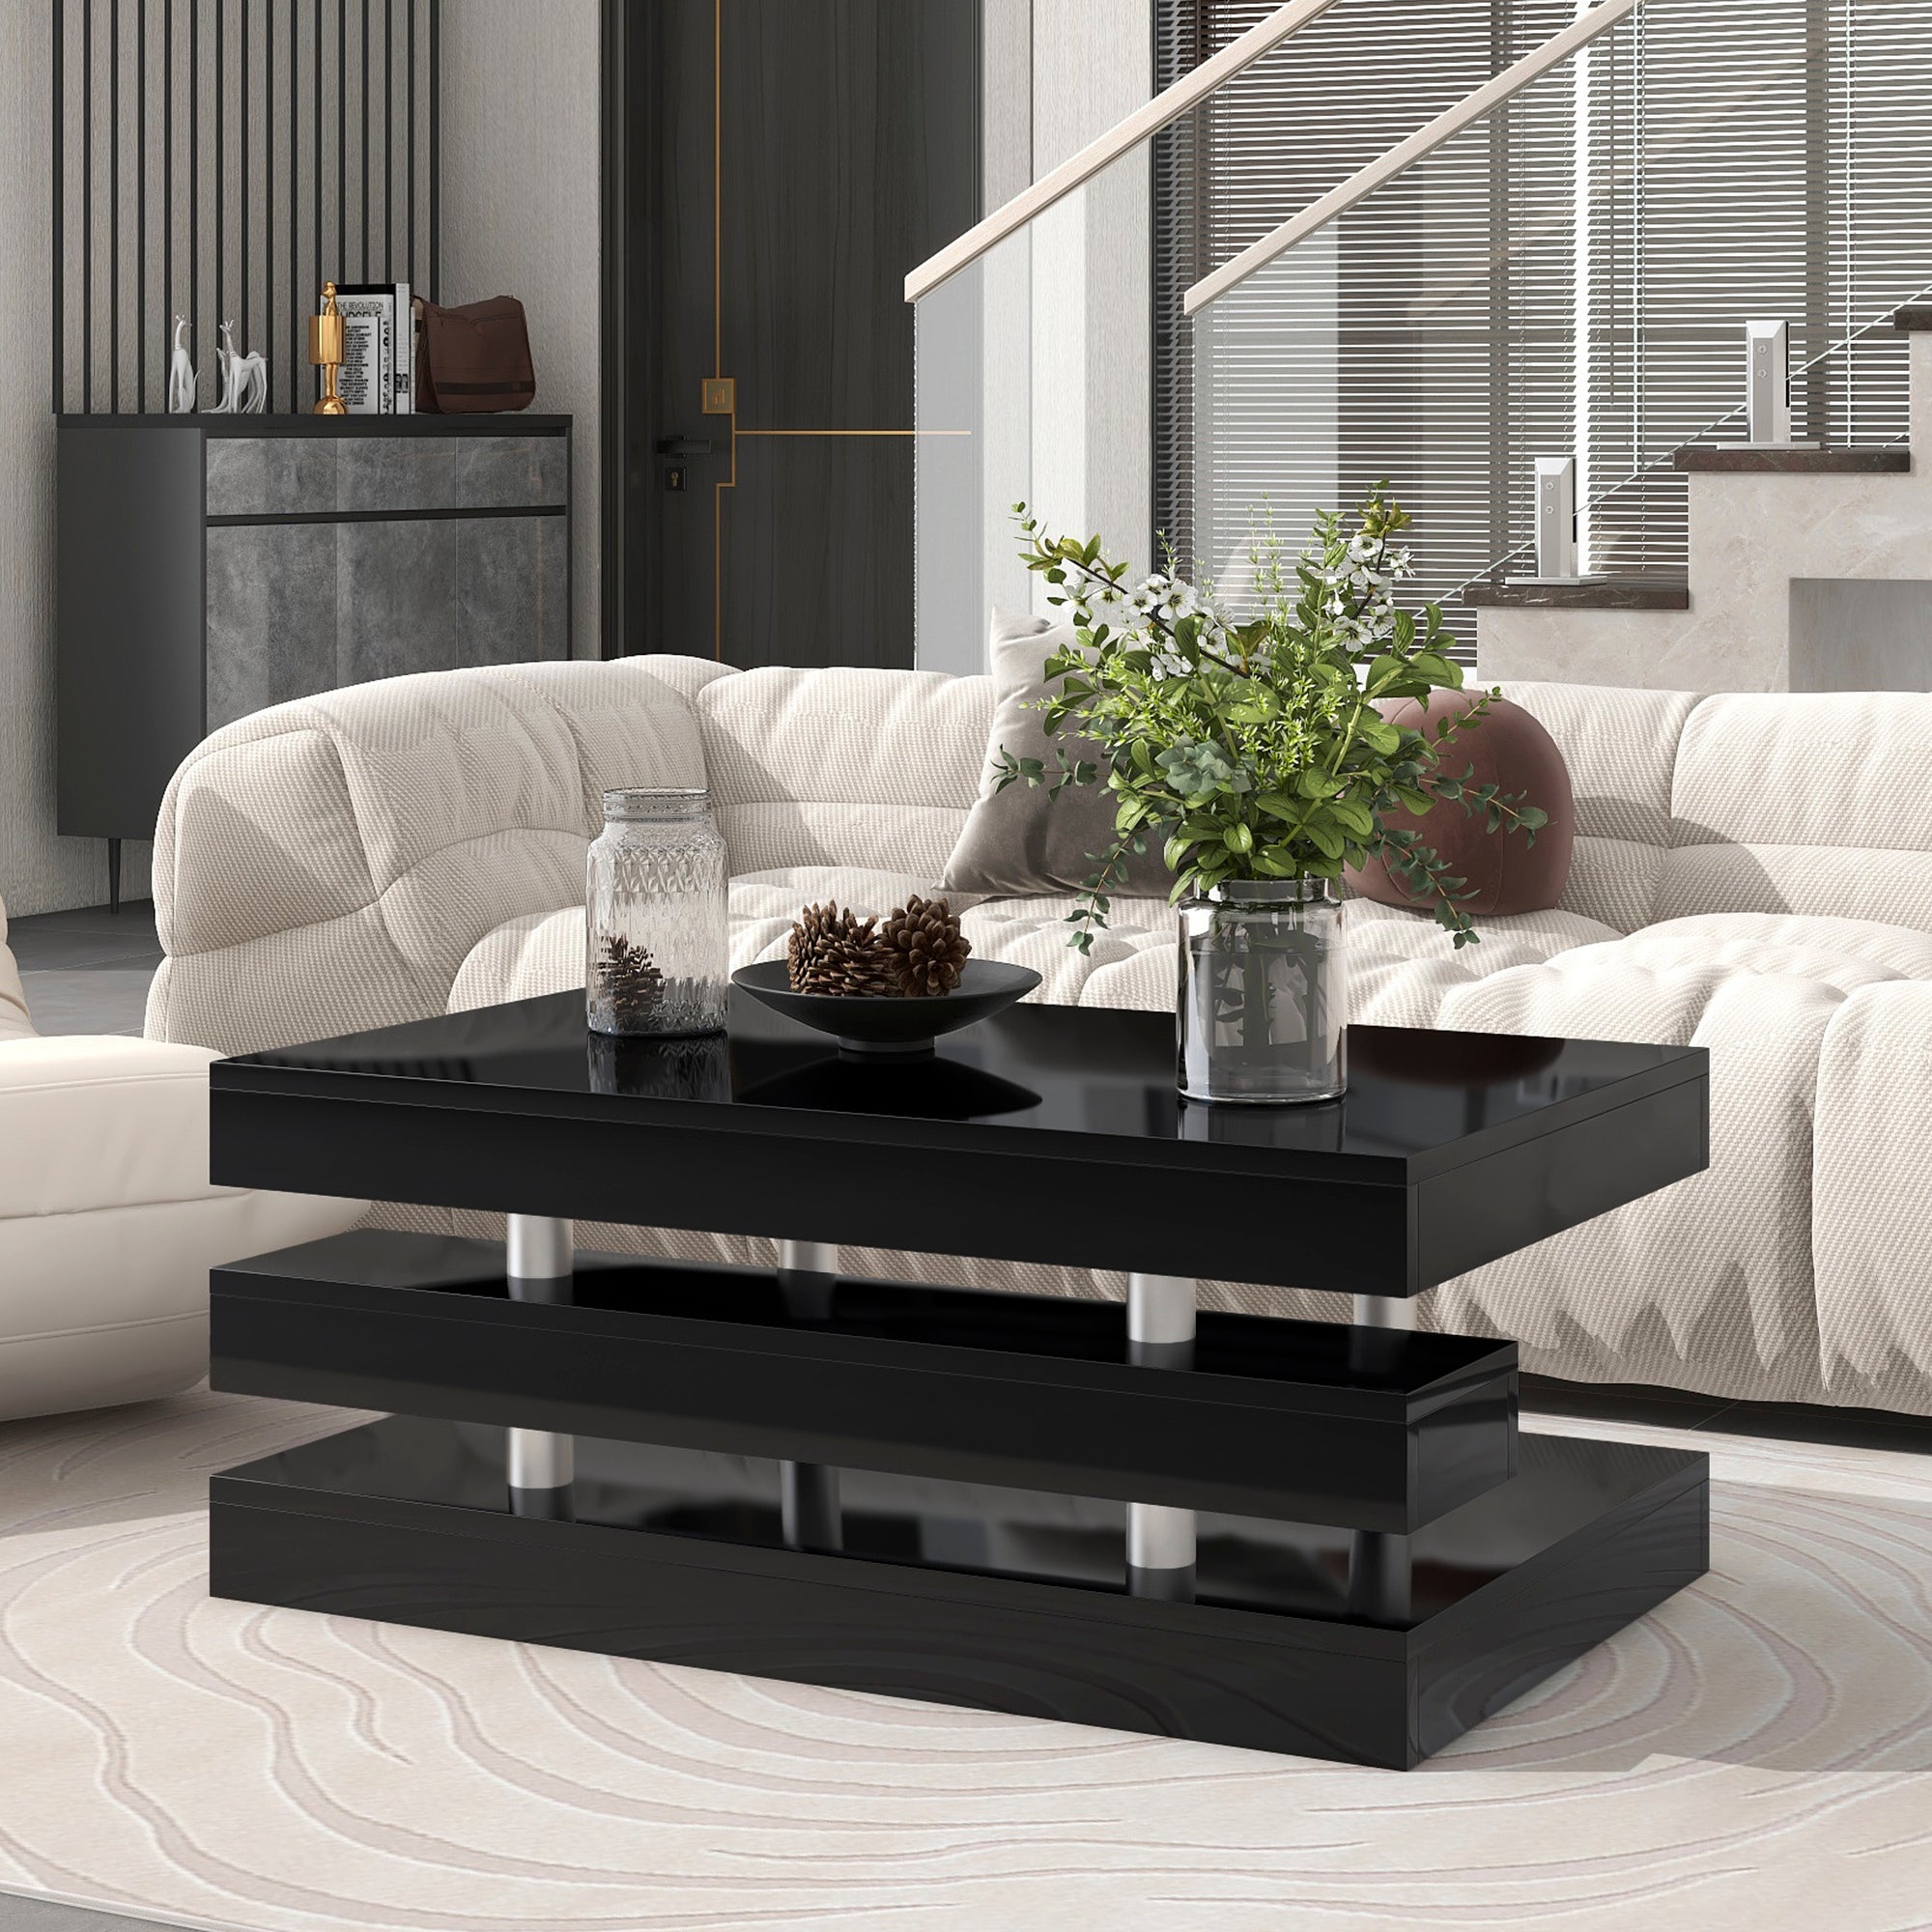 ON TREND Modern 2 Tier Coffee Table with Silver Metal